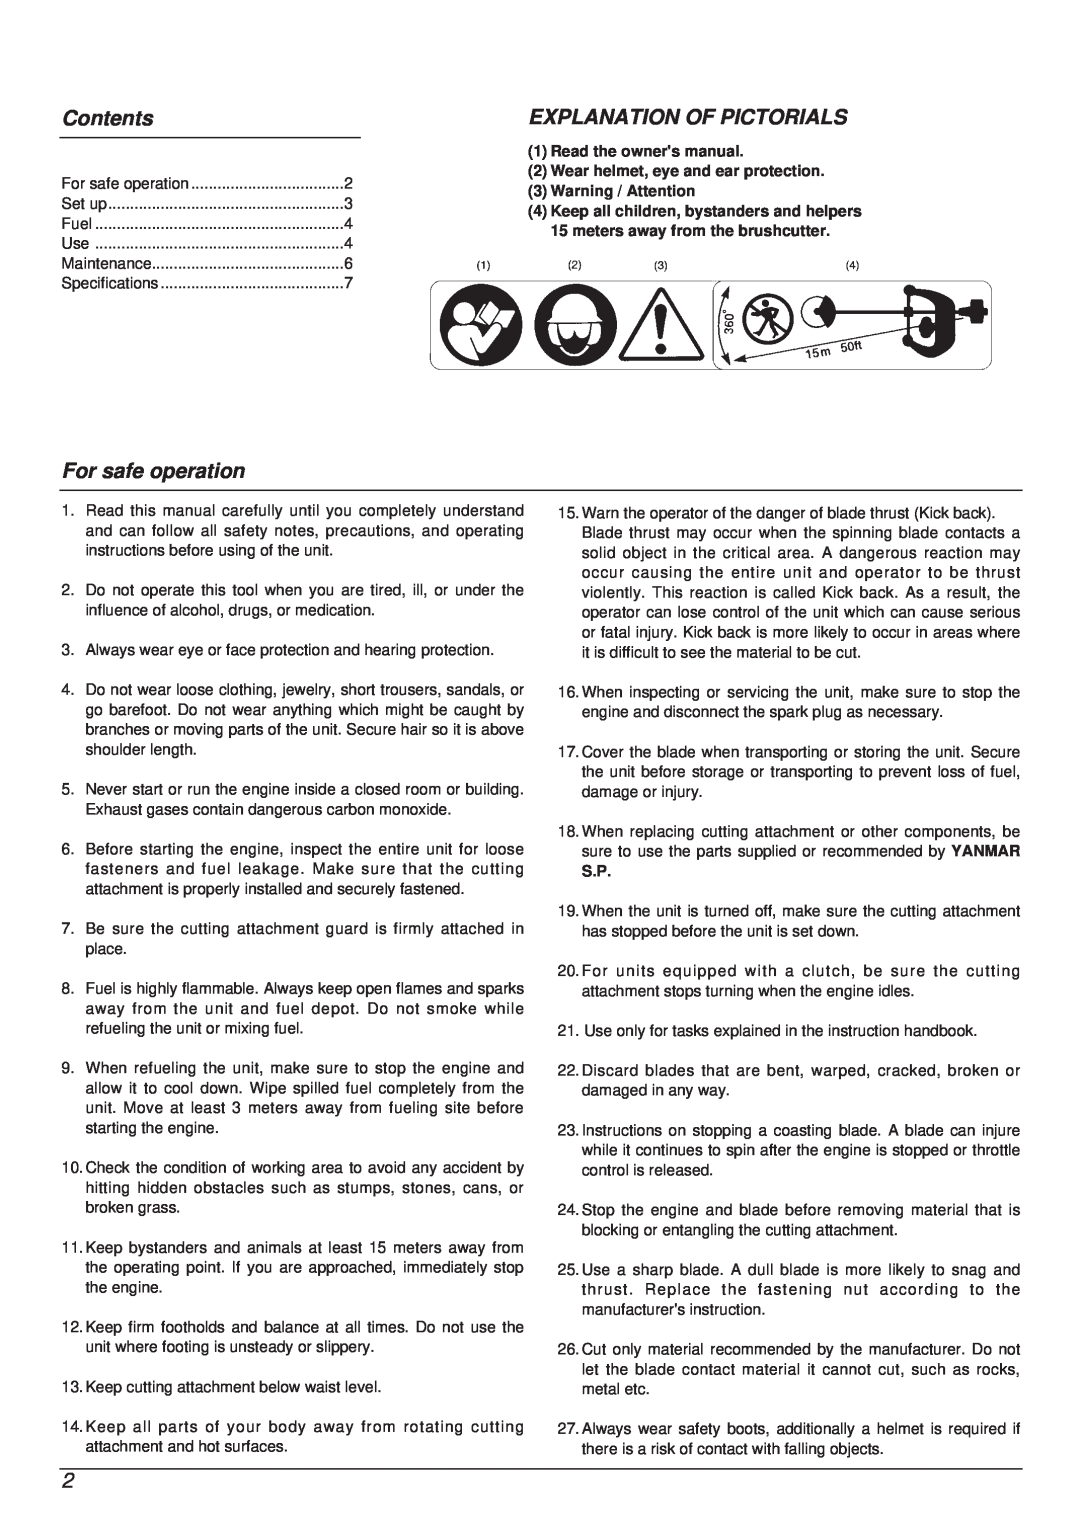 Zenoah YM415FW manual Contents, Explanation Of Pictorials, For safe operation, Warning / Attention 